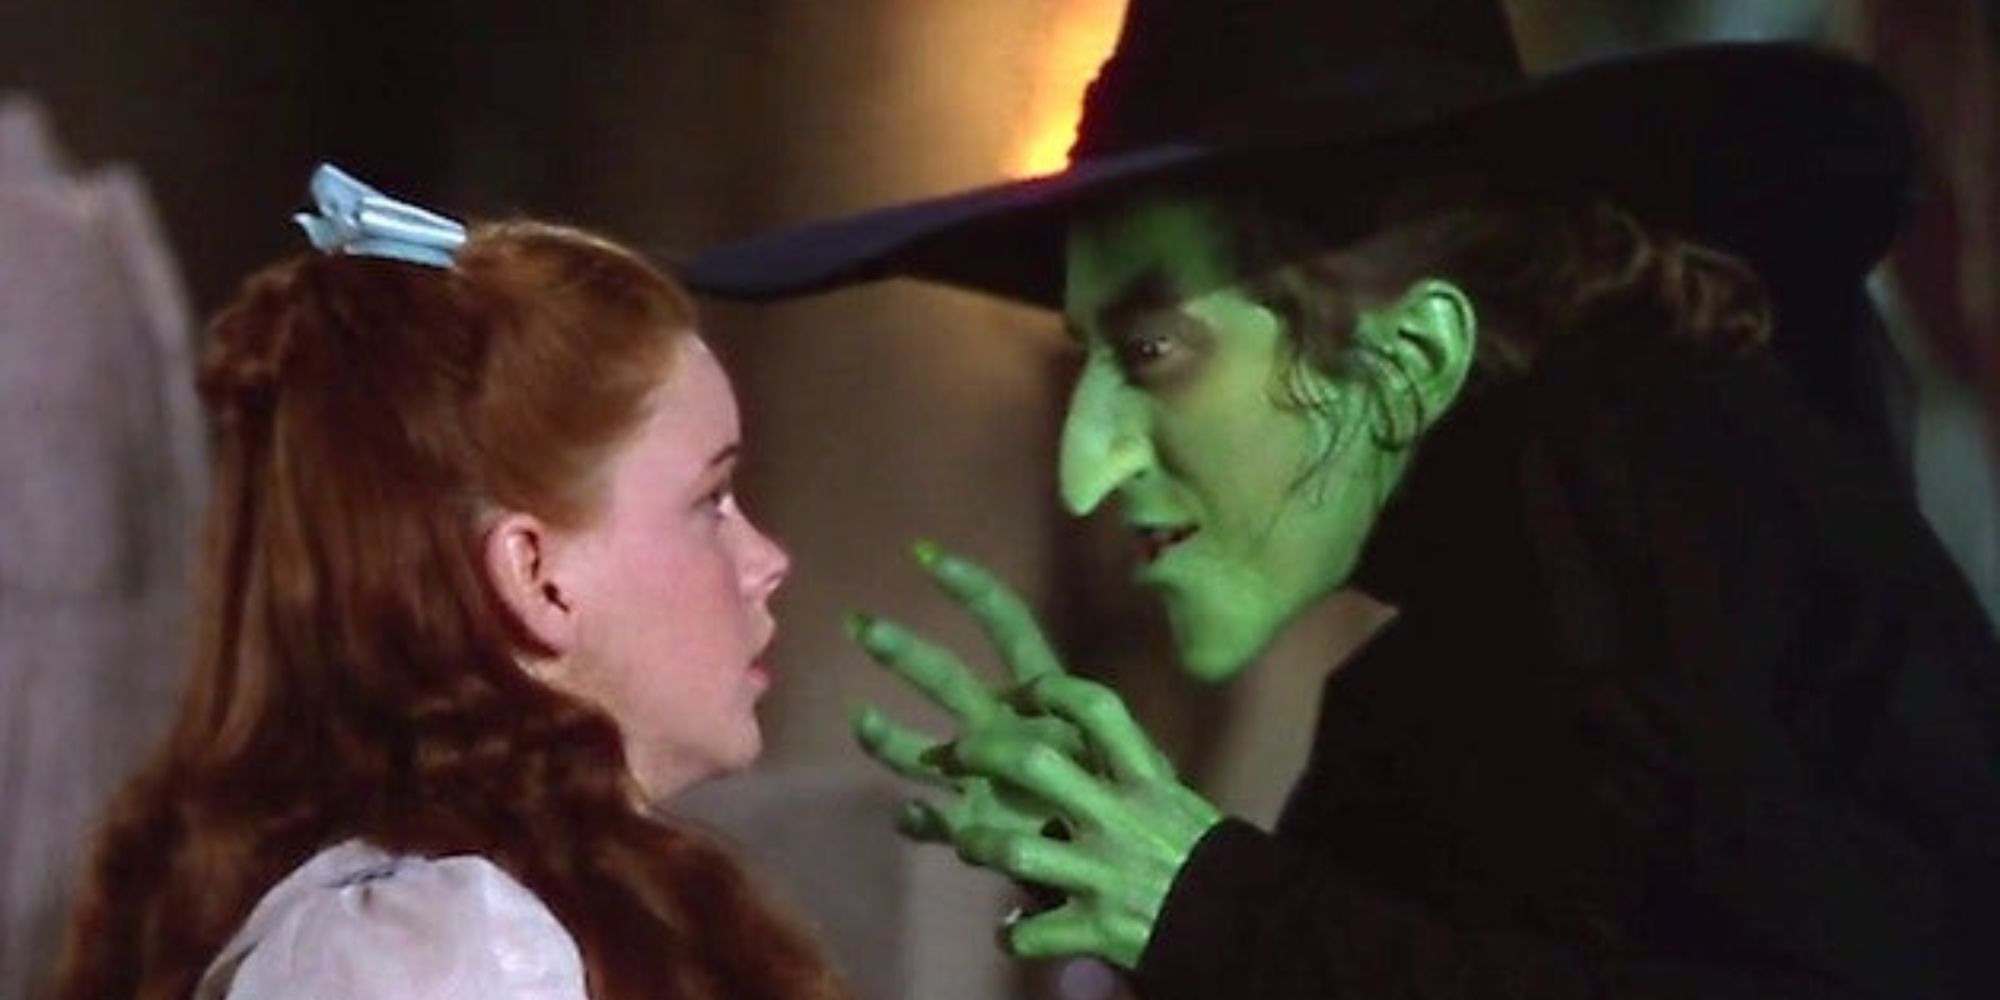 The Wicked Witch of the West confronts Dorothy